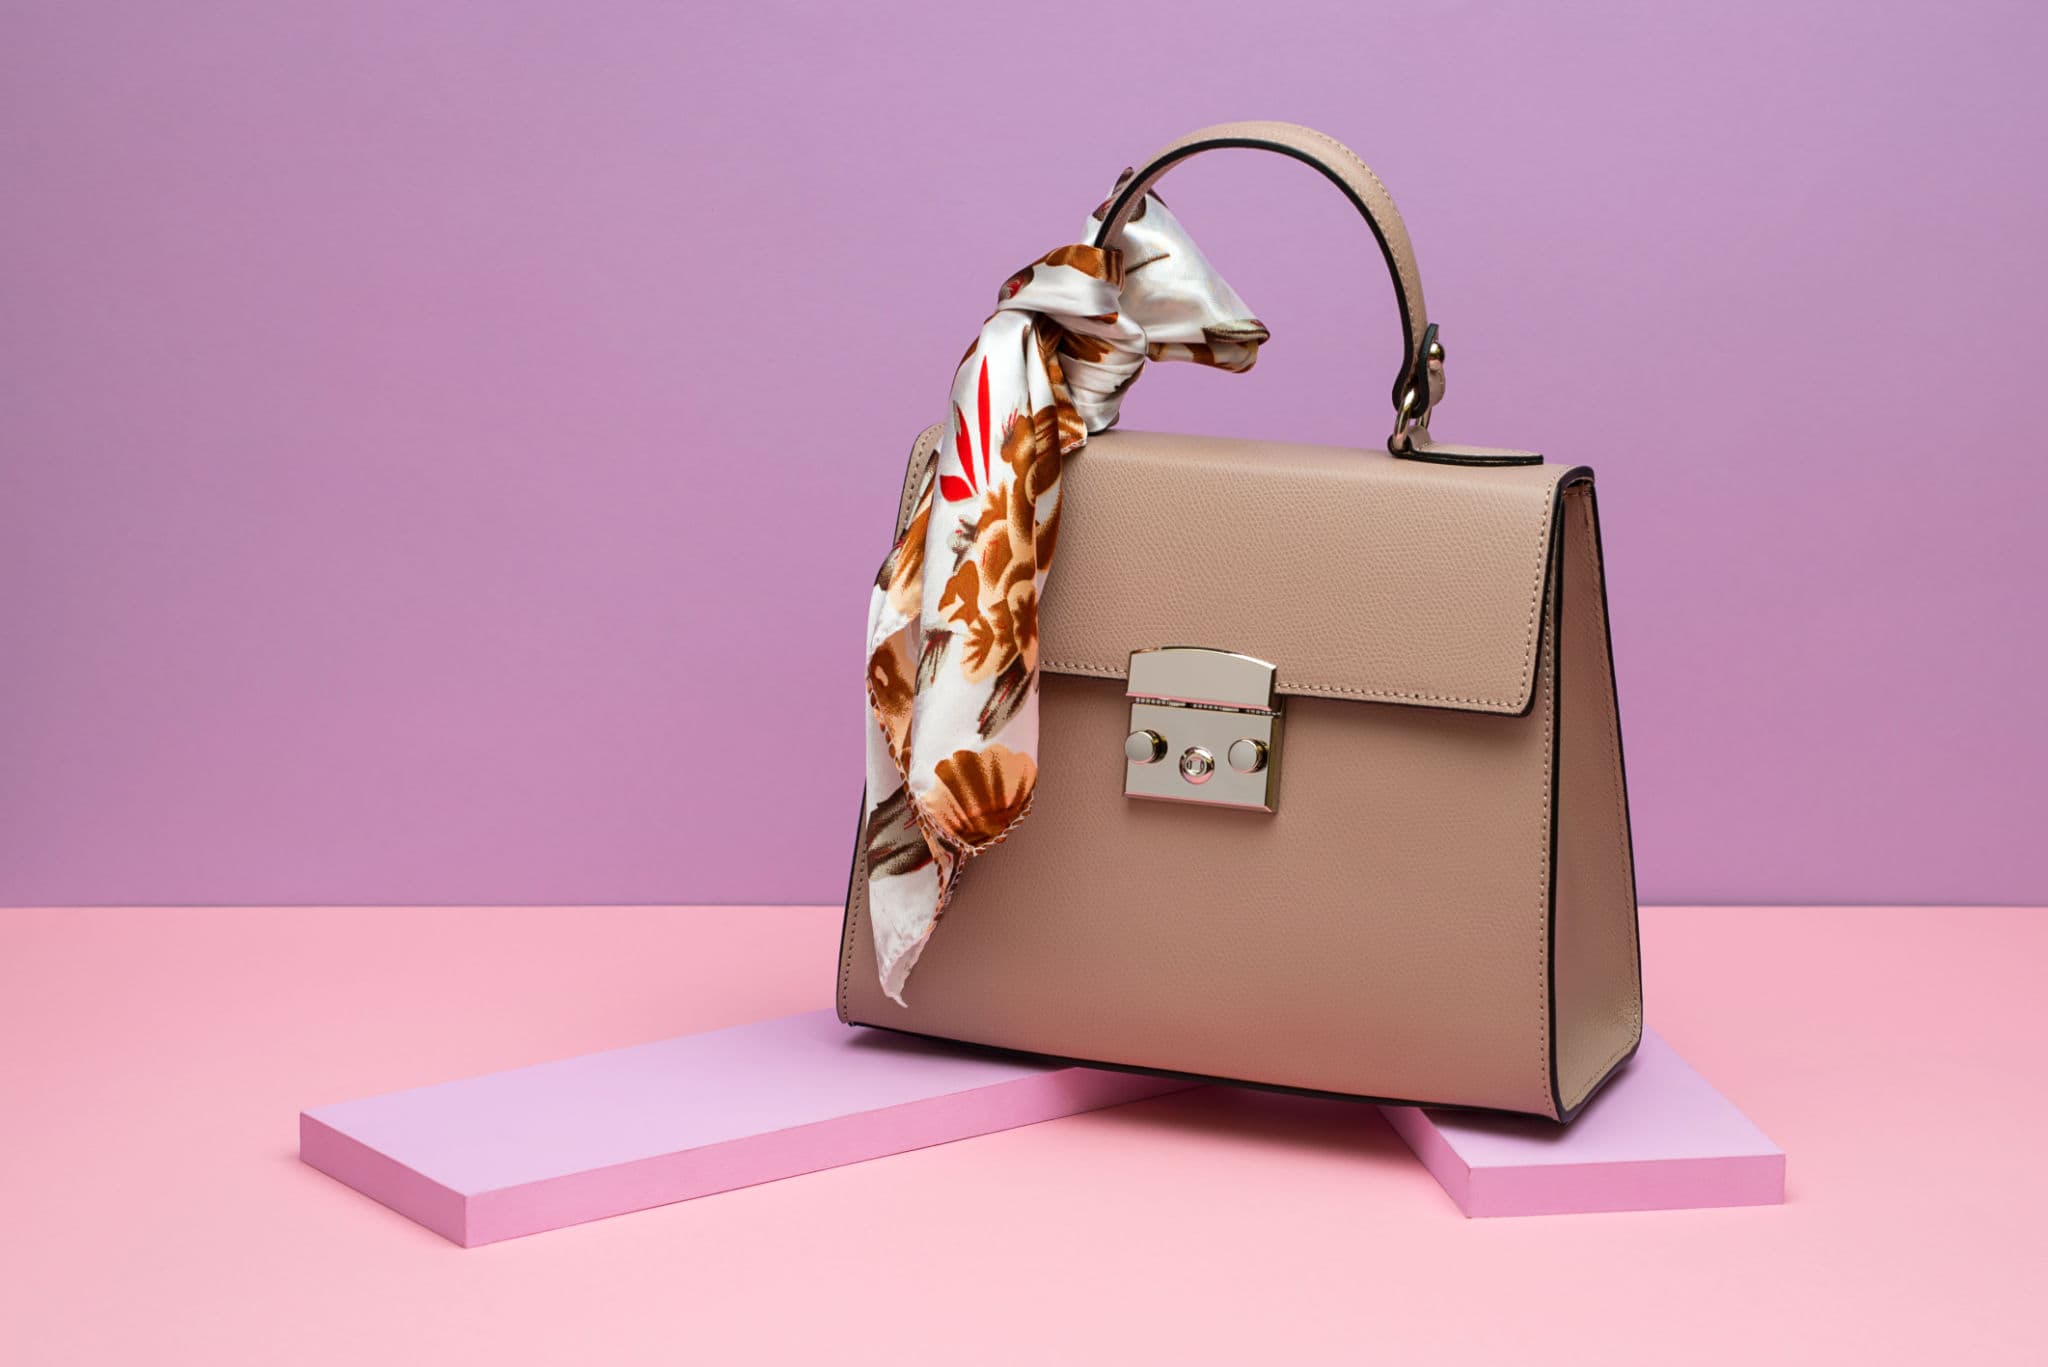 These are the 25 Best Handbag Brands 